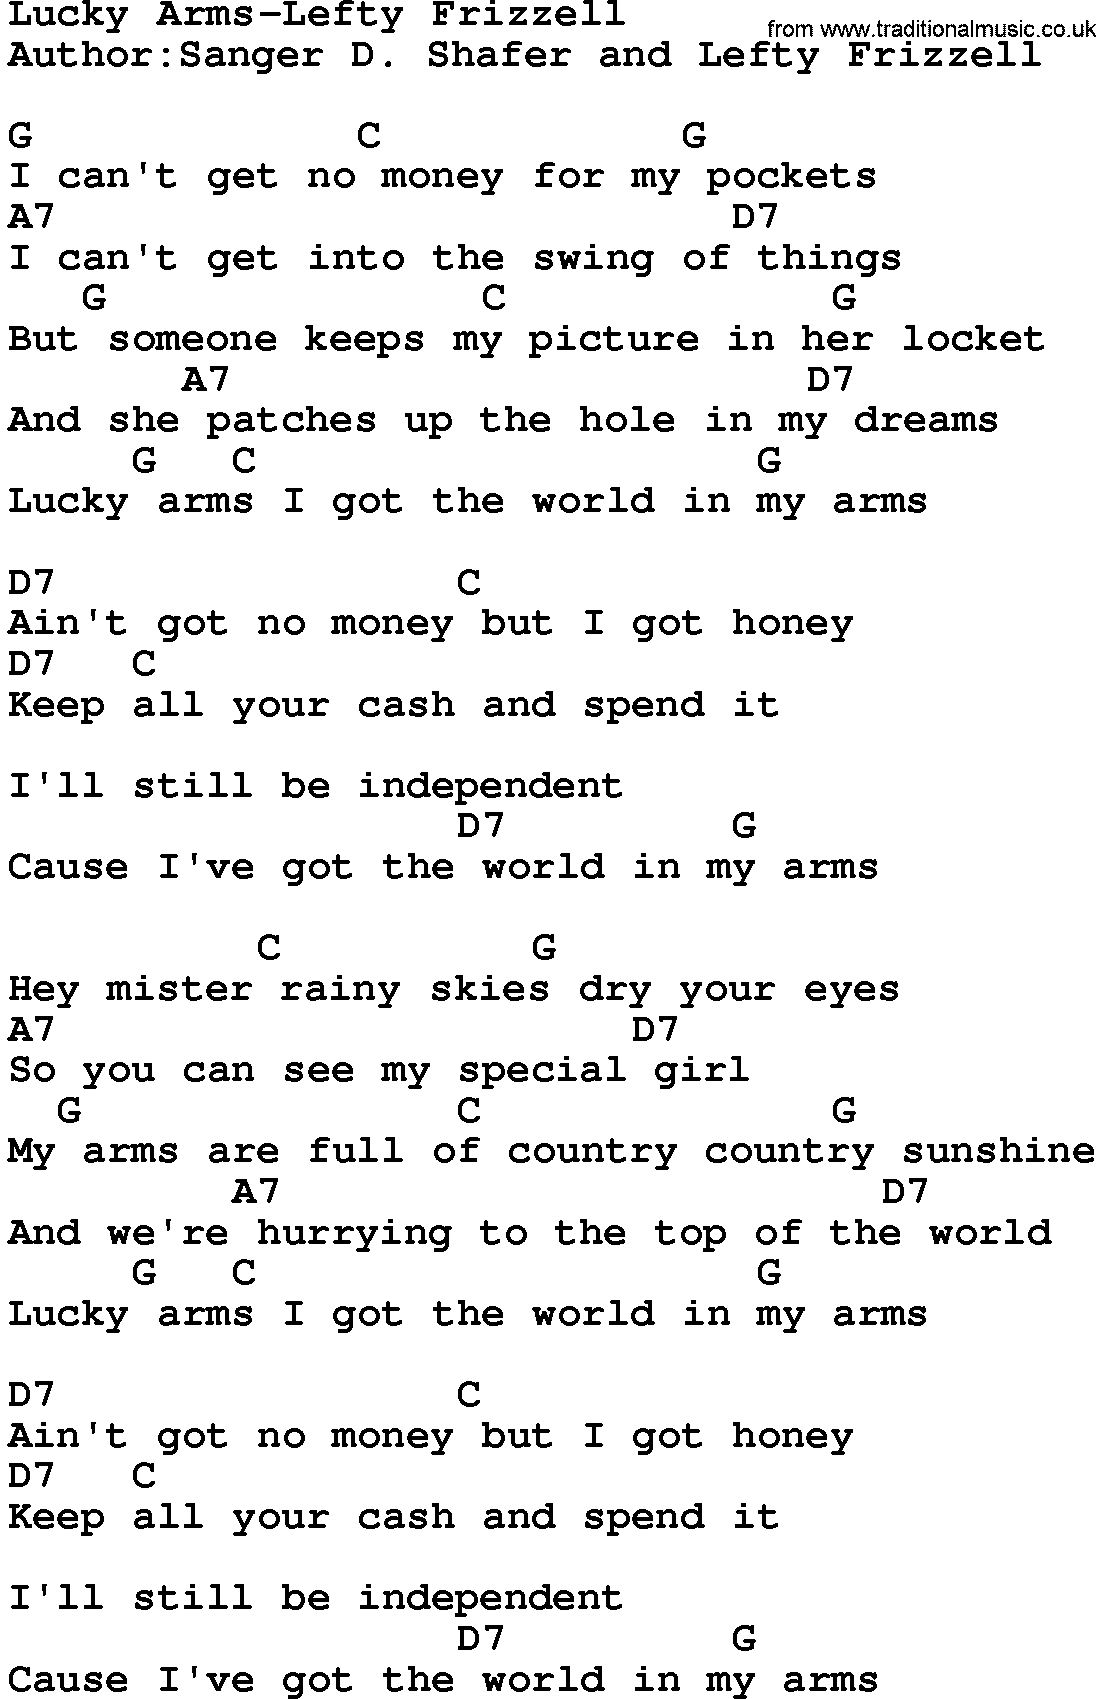 Country music song: Lucky Arms-Lefty Frizzell lyrics and chords